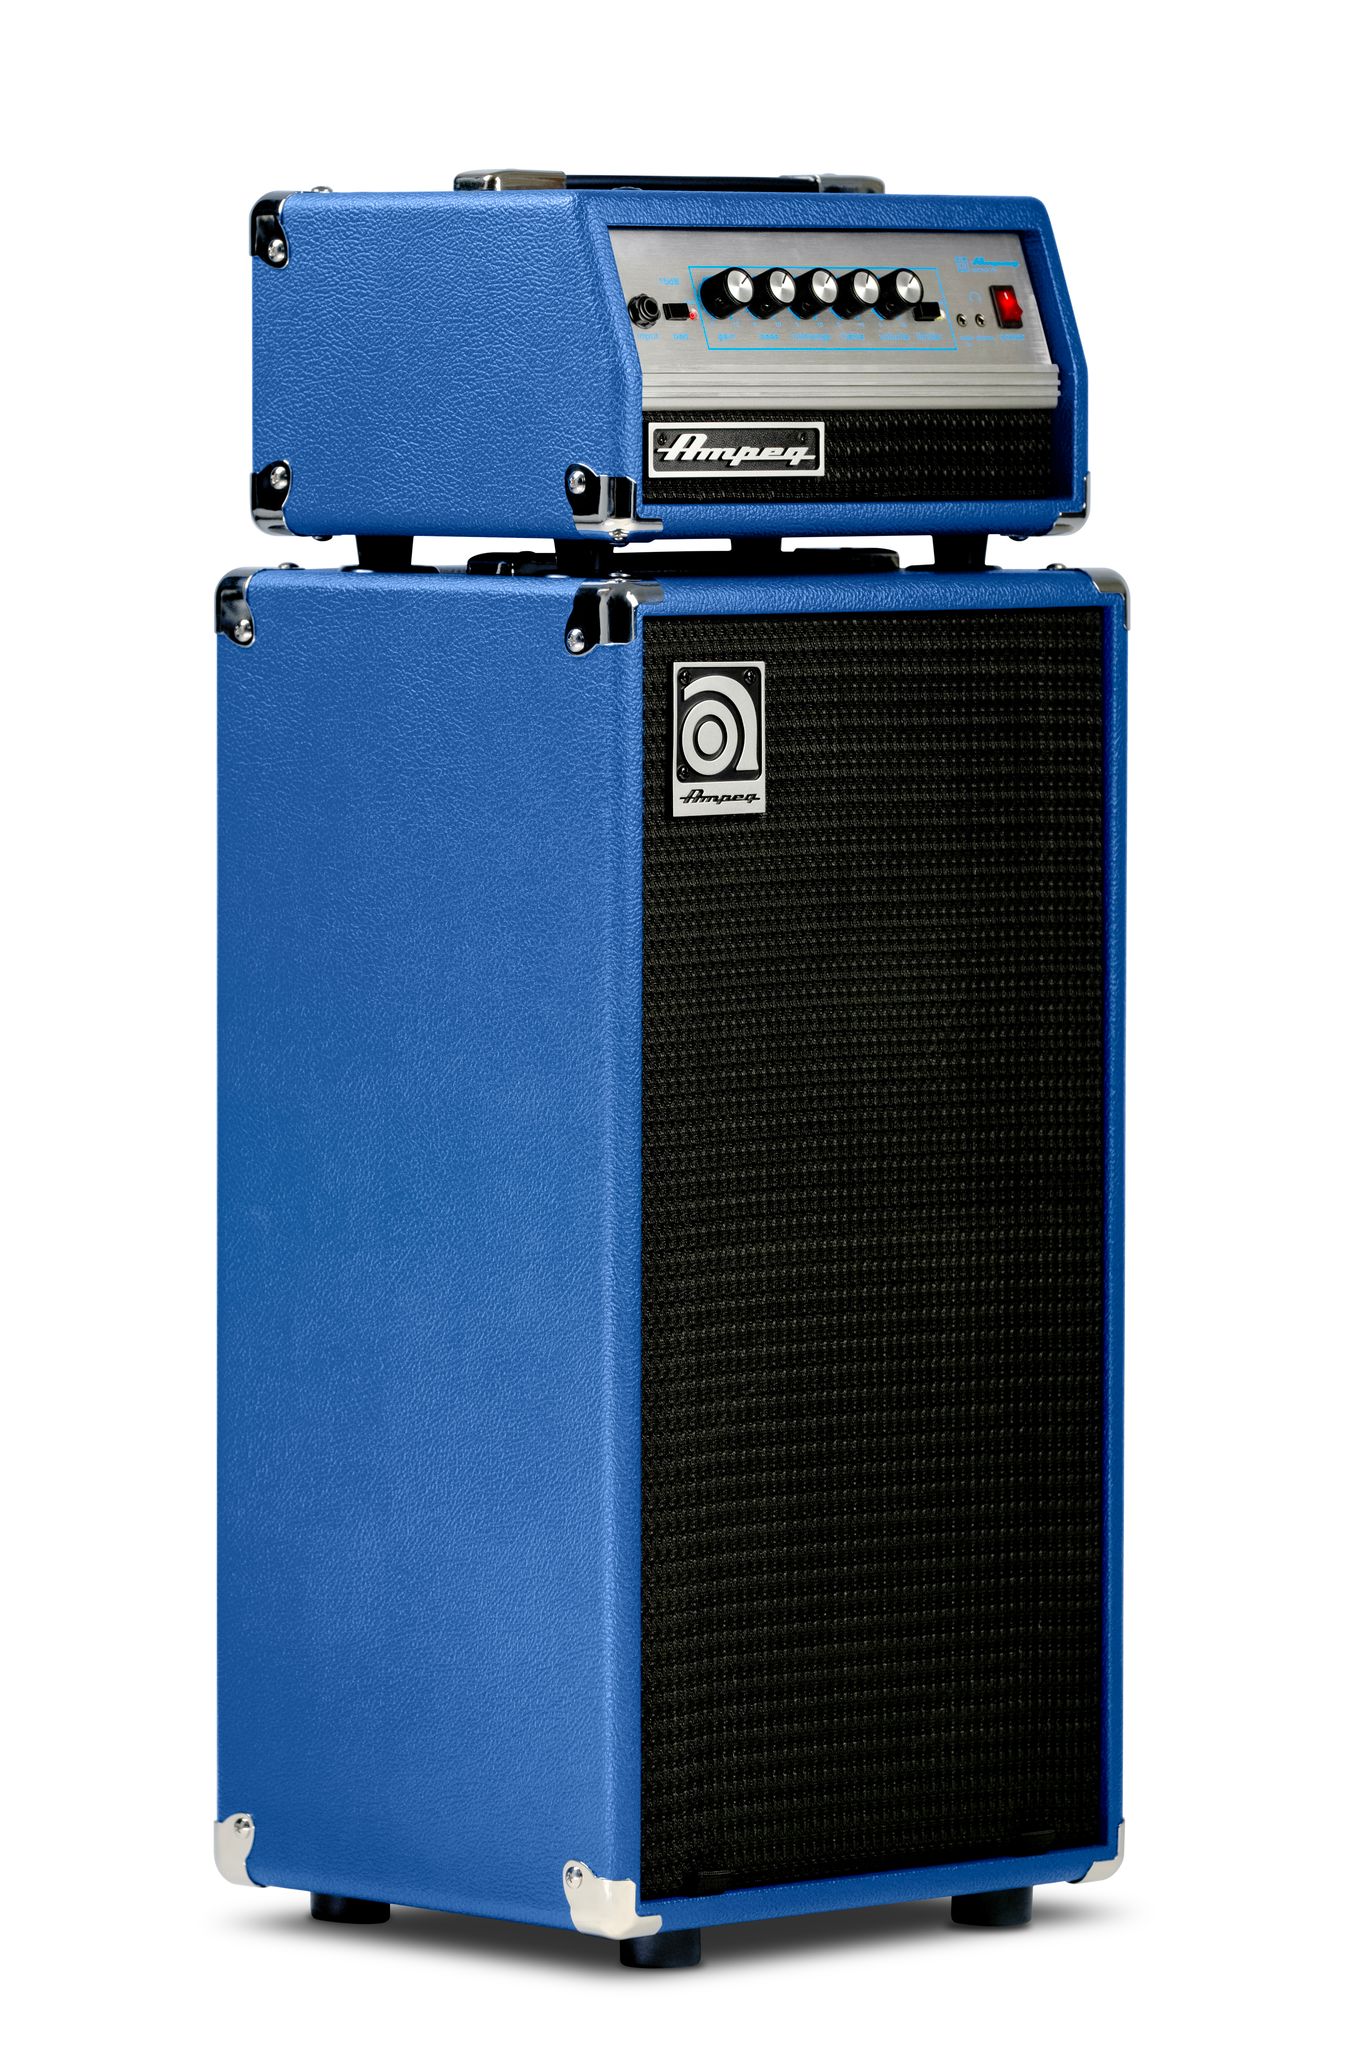 Ampeg Micro Vr Stack Blue Limited Edition 2x10 200w - Stack amplificador bajo - Variation 1